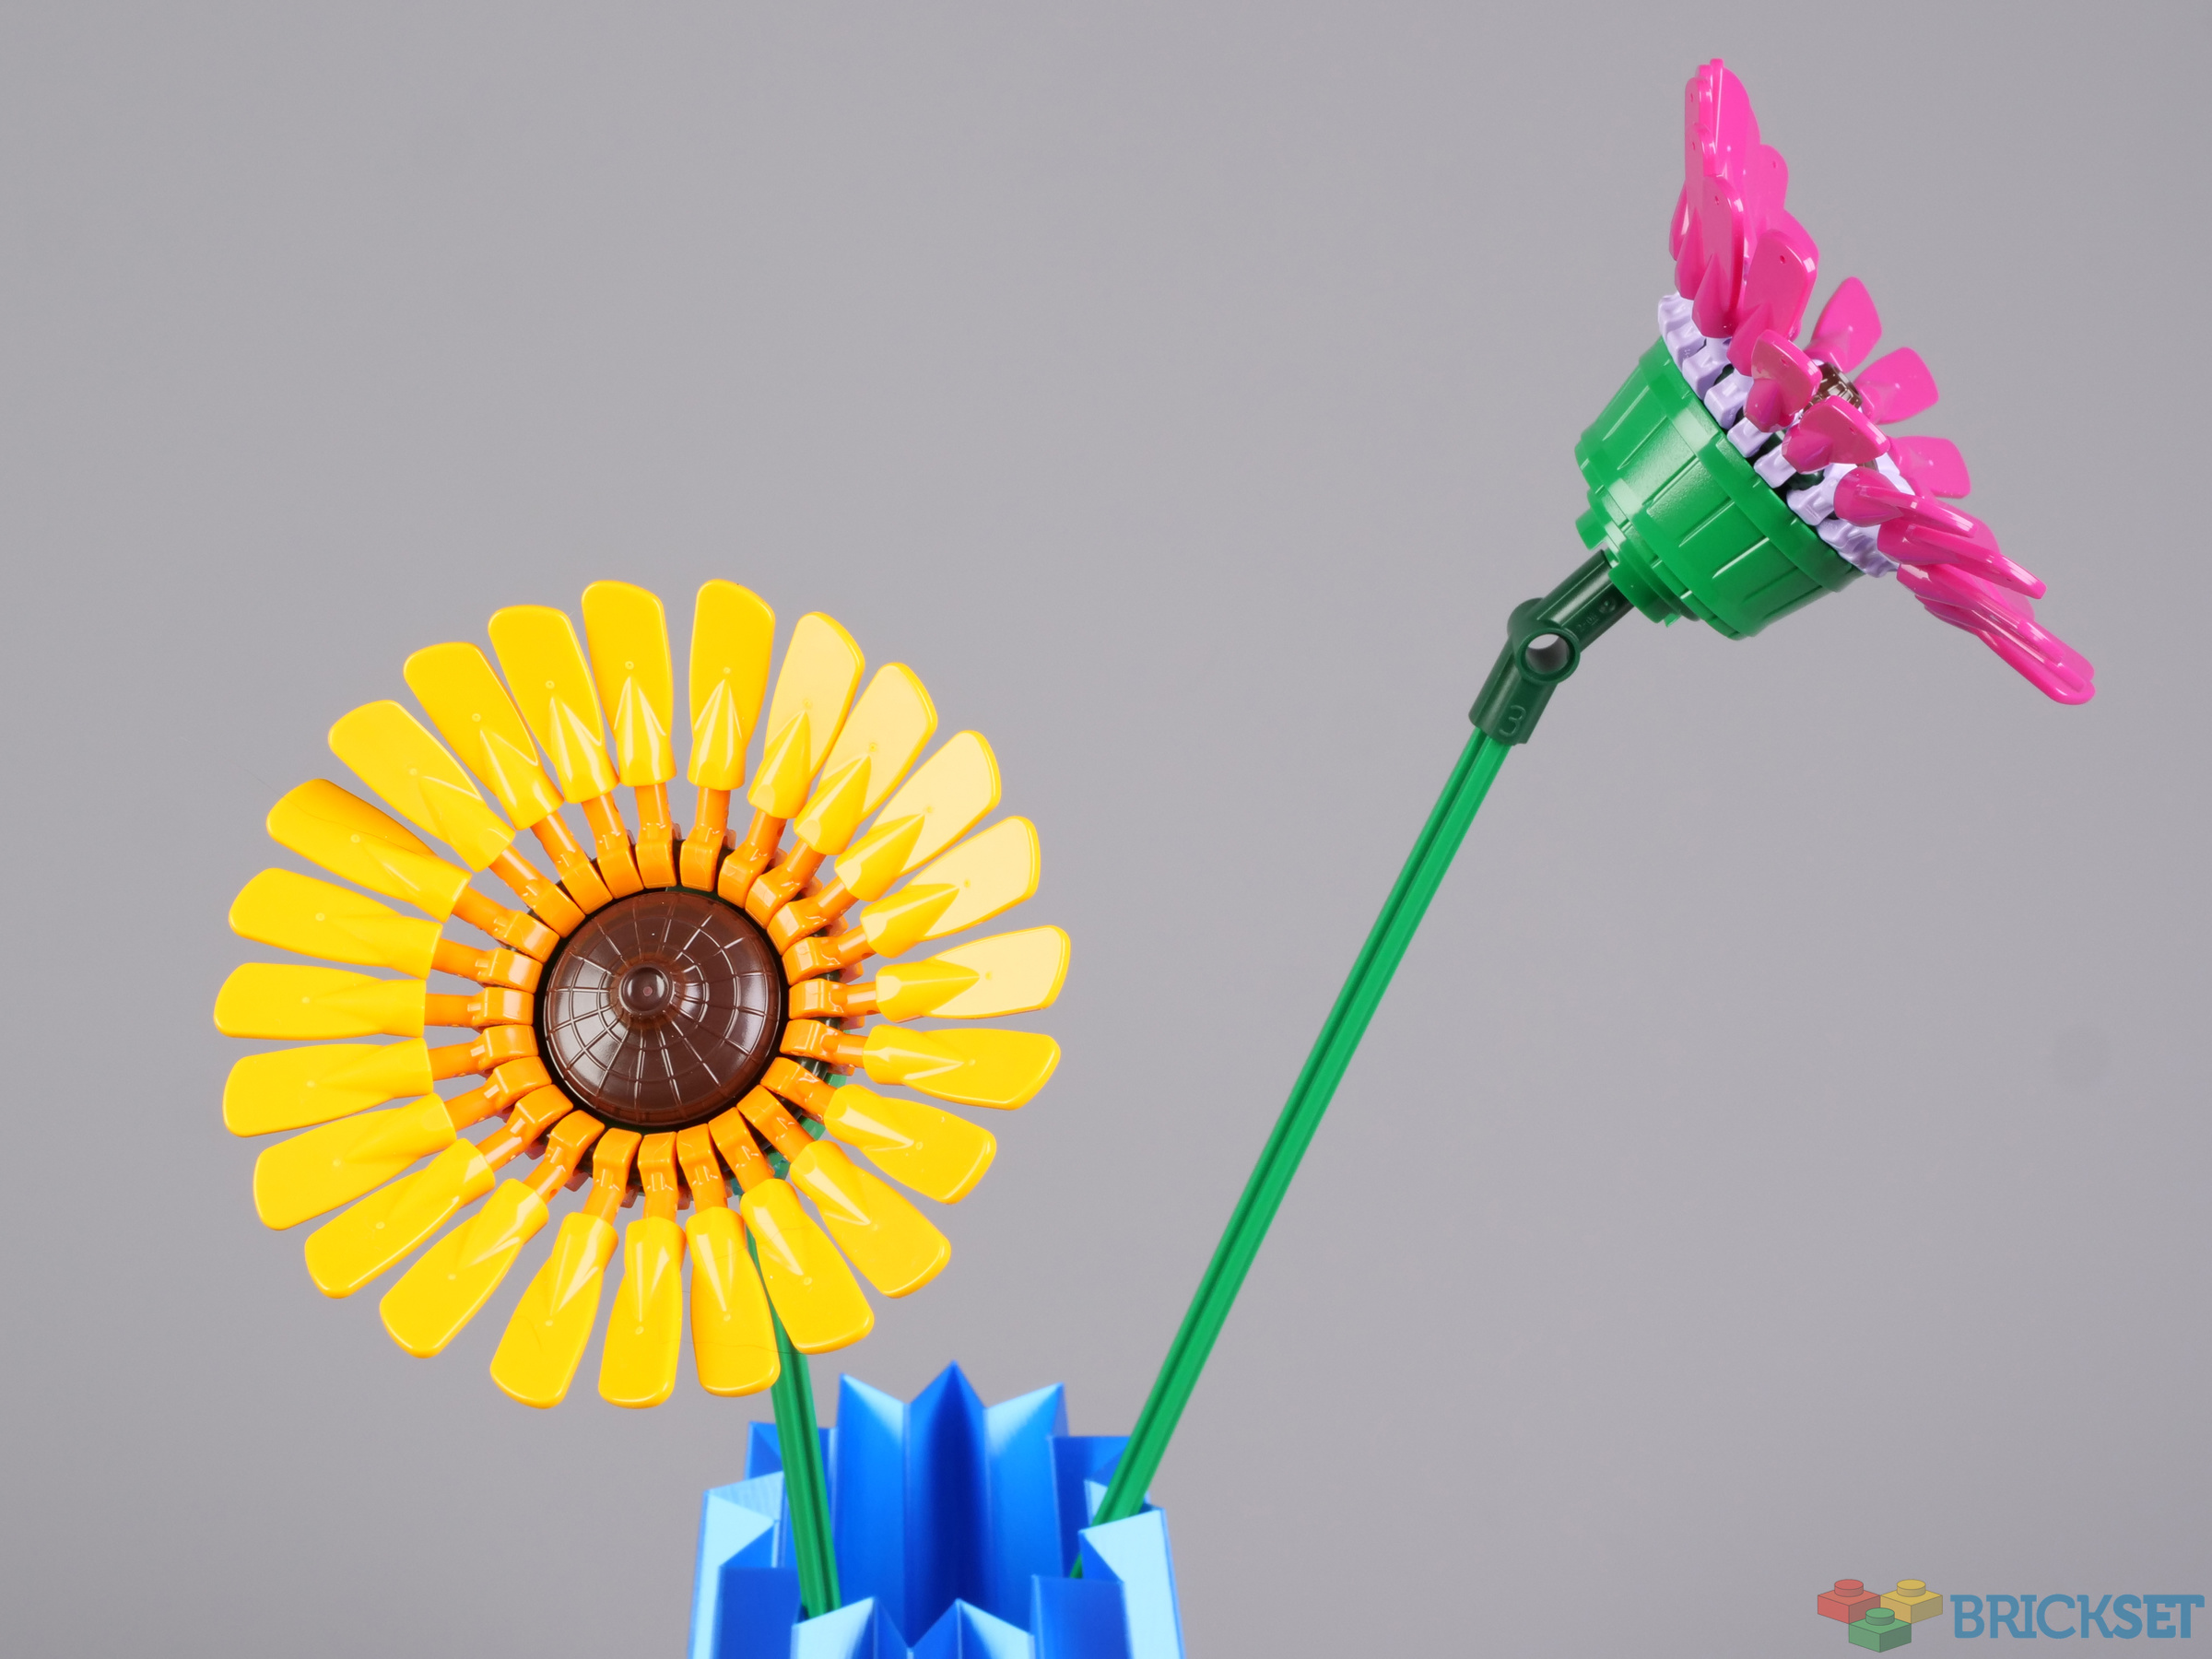 LEGO Flower Bouquet review: A perfect Valentine's Day gift - 9to5Toys